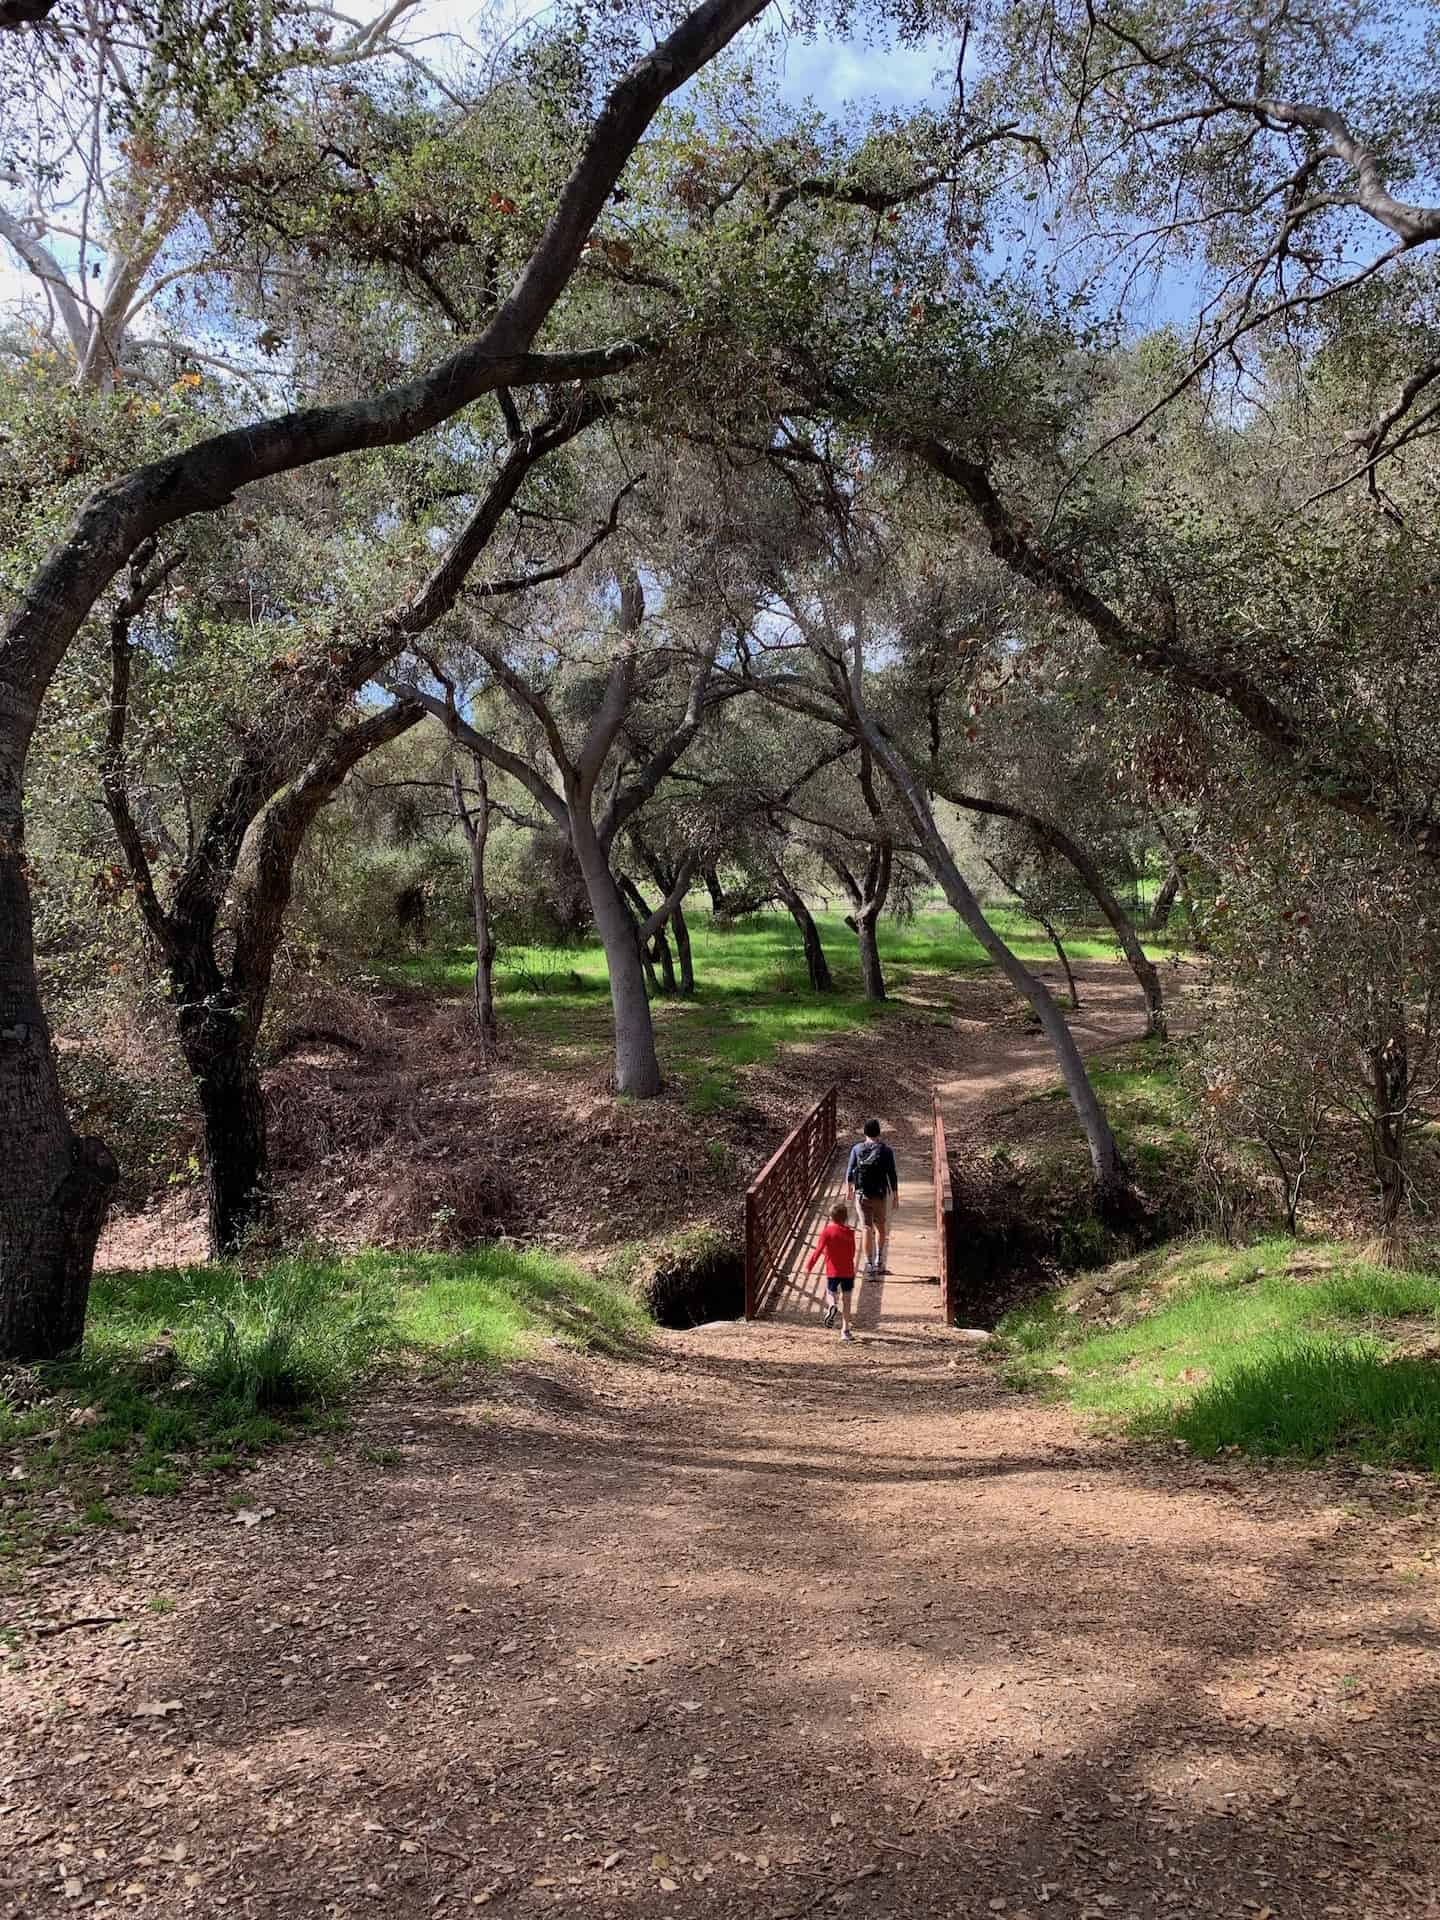 FELICITA COUNTY PARK – A MORNING ADVENTURE WITH KIDS